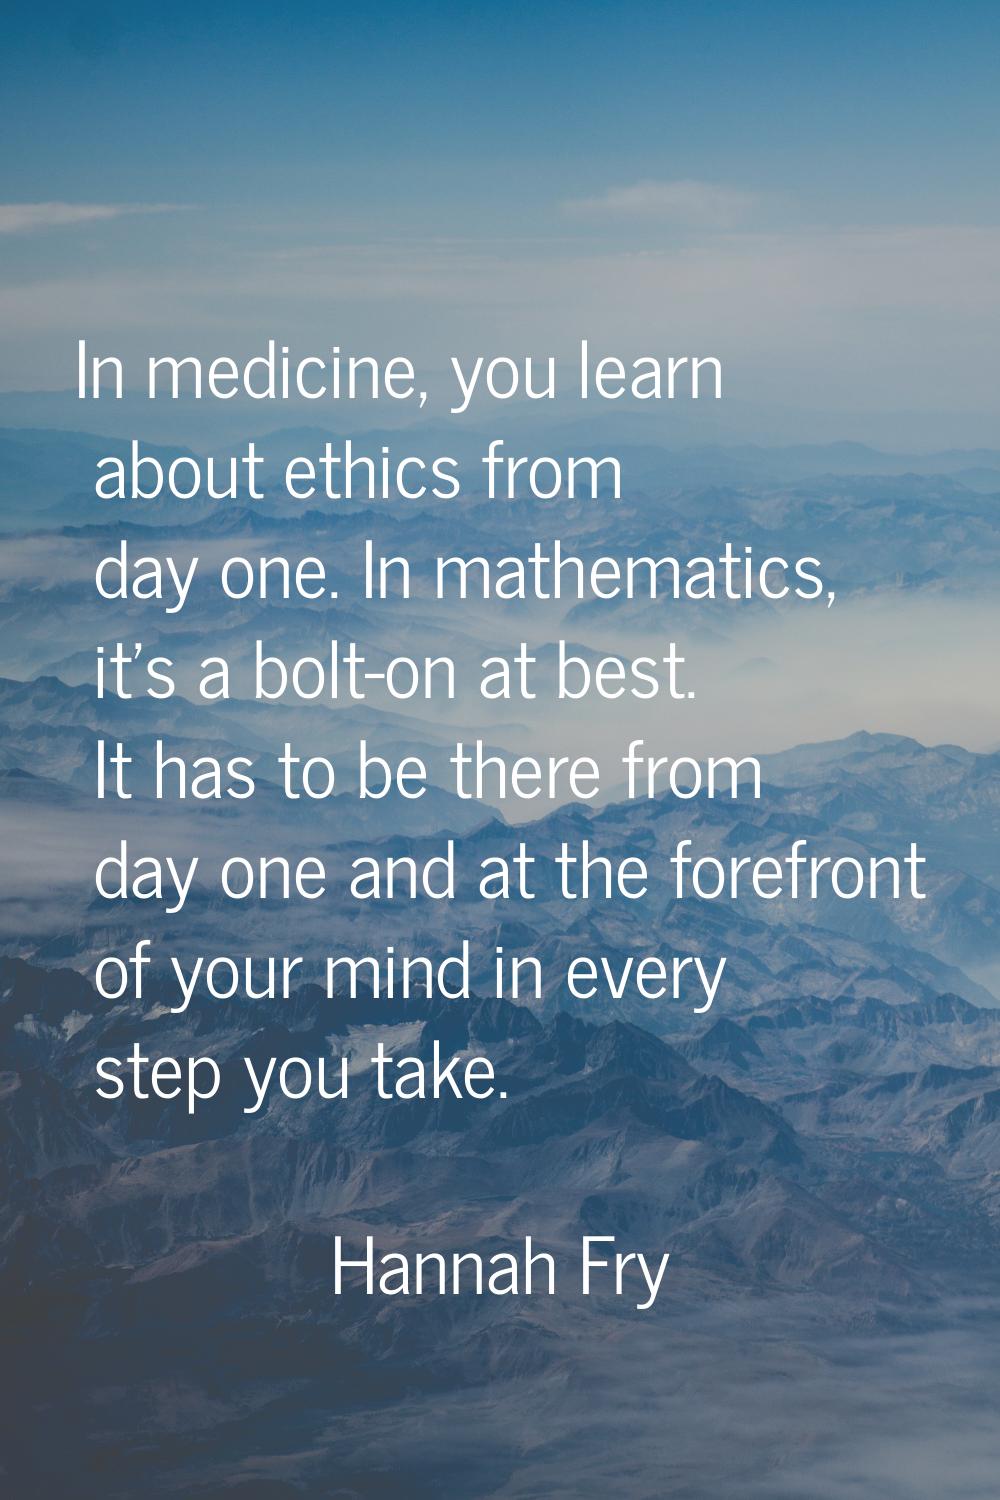 In medicine, you learn about ethics from day one. In mathematics, it's a bolt-on at best. It has to